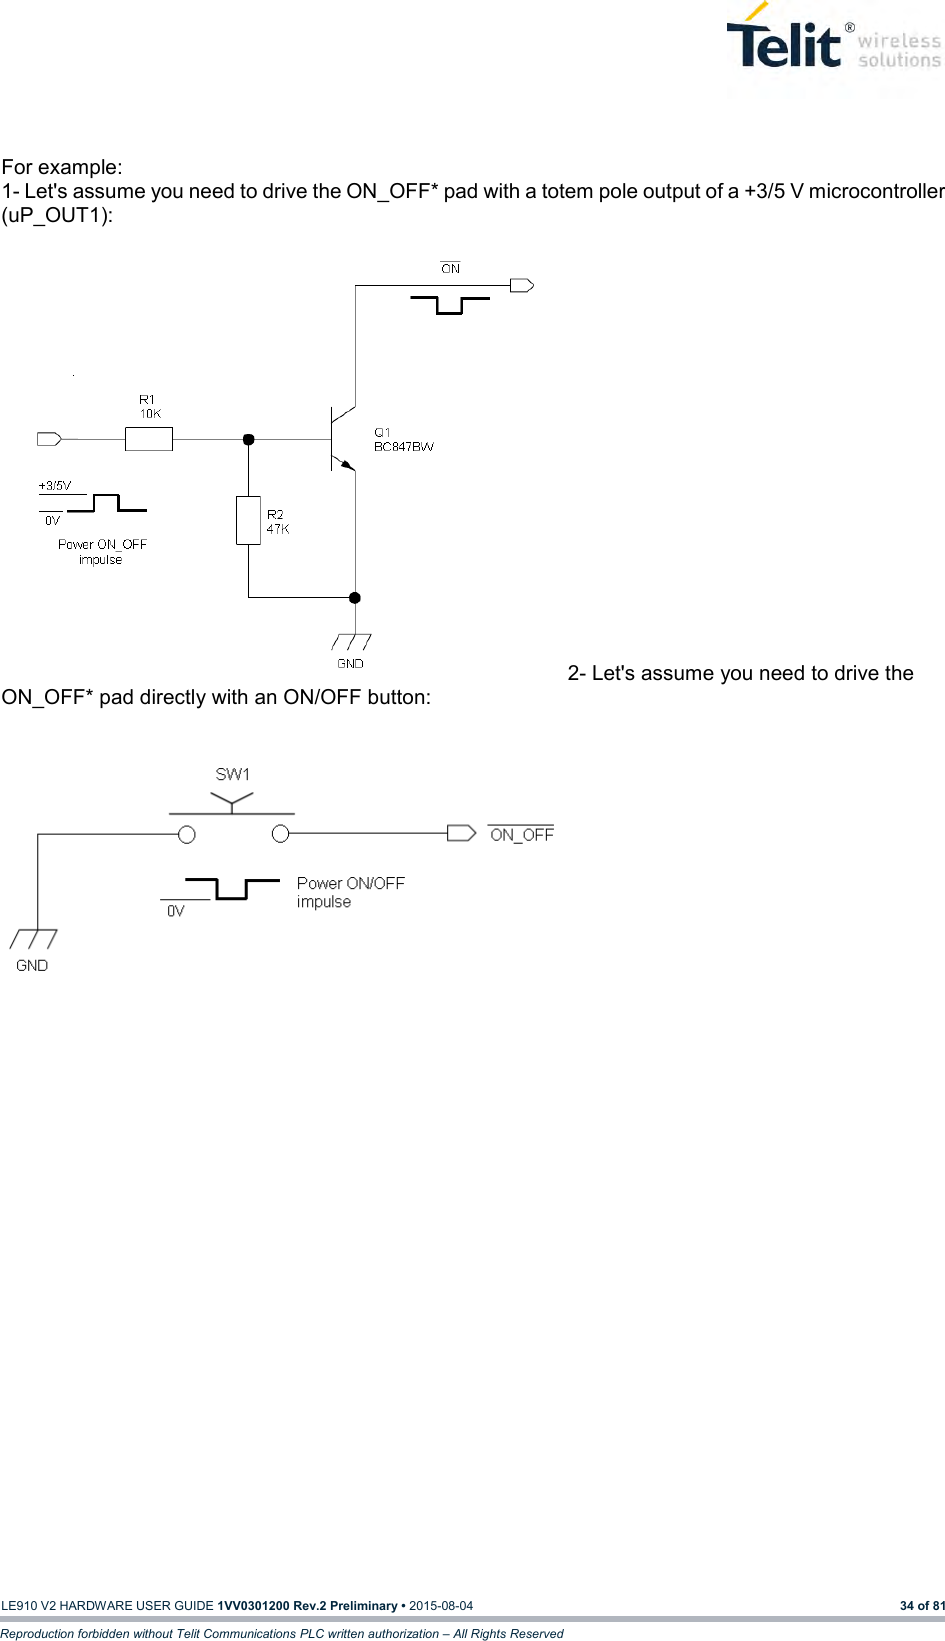   LE910 V2 HARDWARE USER GUIDE 1VV0301200 Rev.2 Preliminary • 2015-08-04 34 of 81 Reproduction forbidden without Telit Communications PLC written authorization – All Rights Reserved  For example: 1- Let&apos;s assume you need to drive the ON_OFF* pad with a totem pole output of a +3/5 V microcontroller (uP_OUT1):              2- Let&apos;s assume you need to drive the ON_OFF* pad directly with an ON/OFF button:              